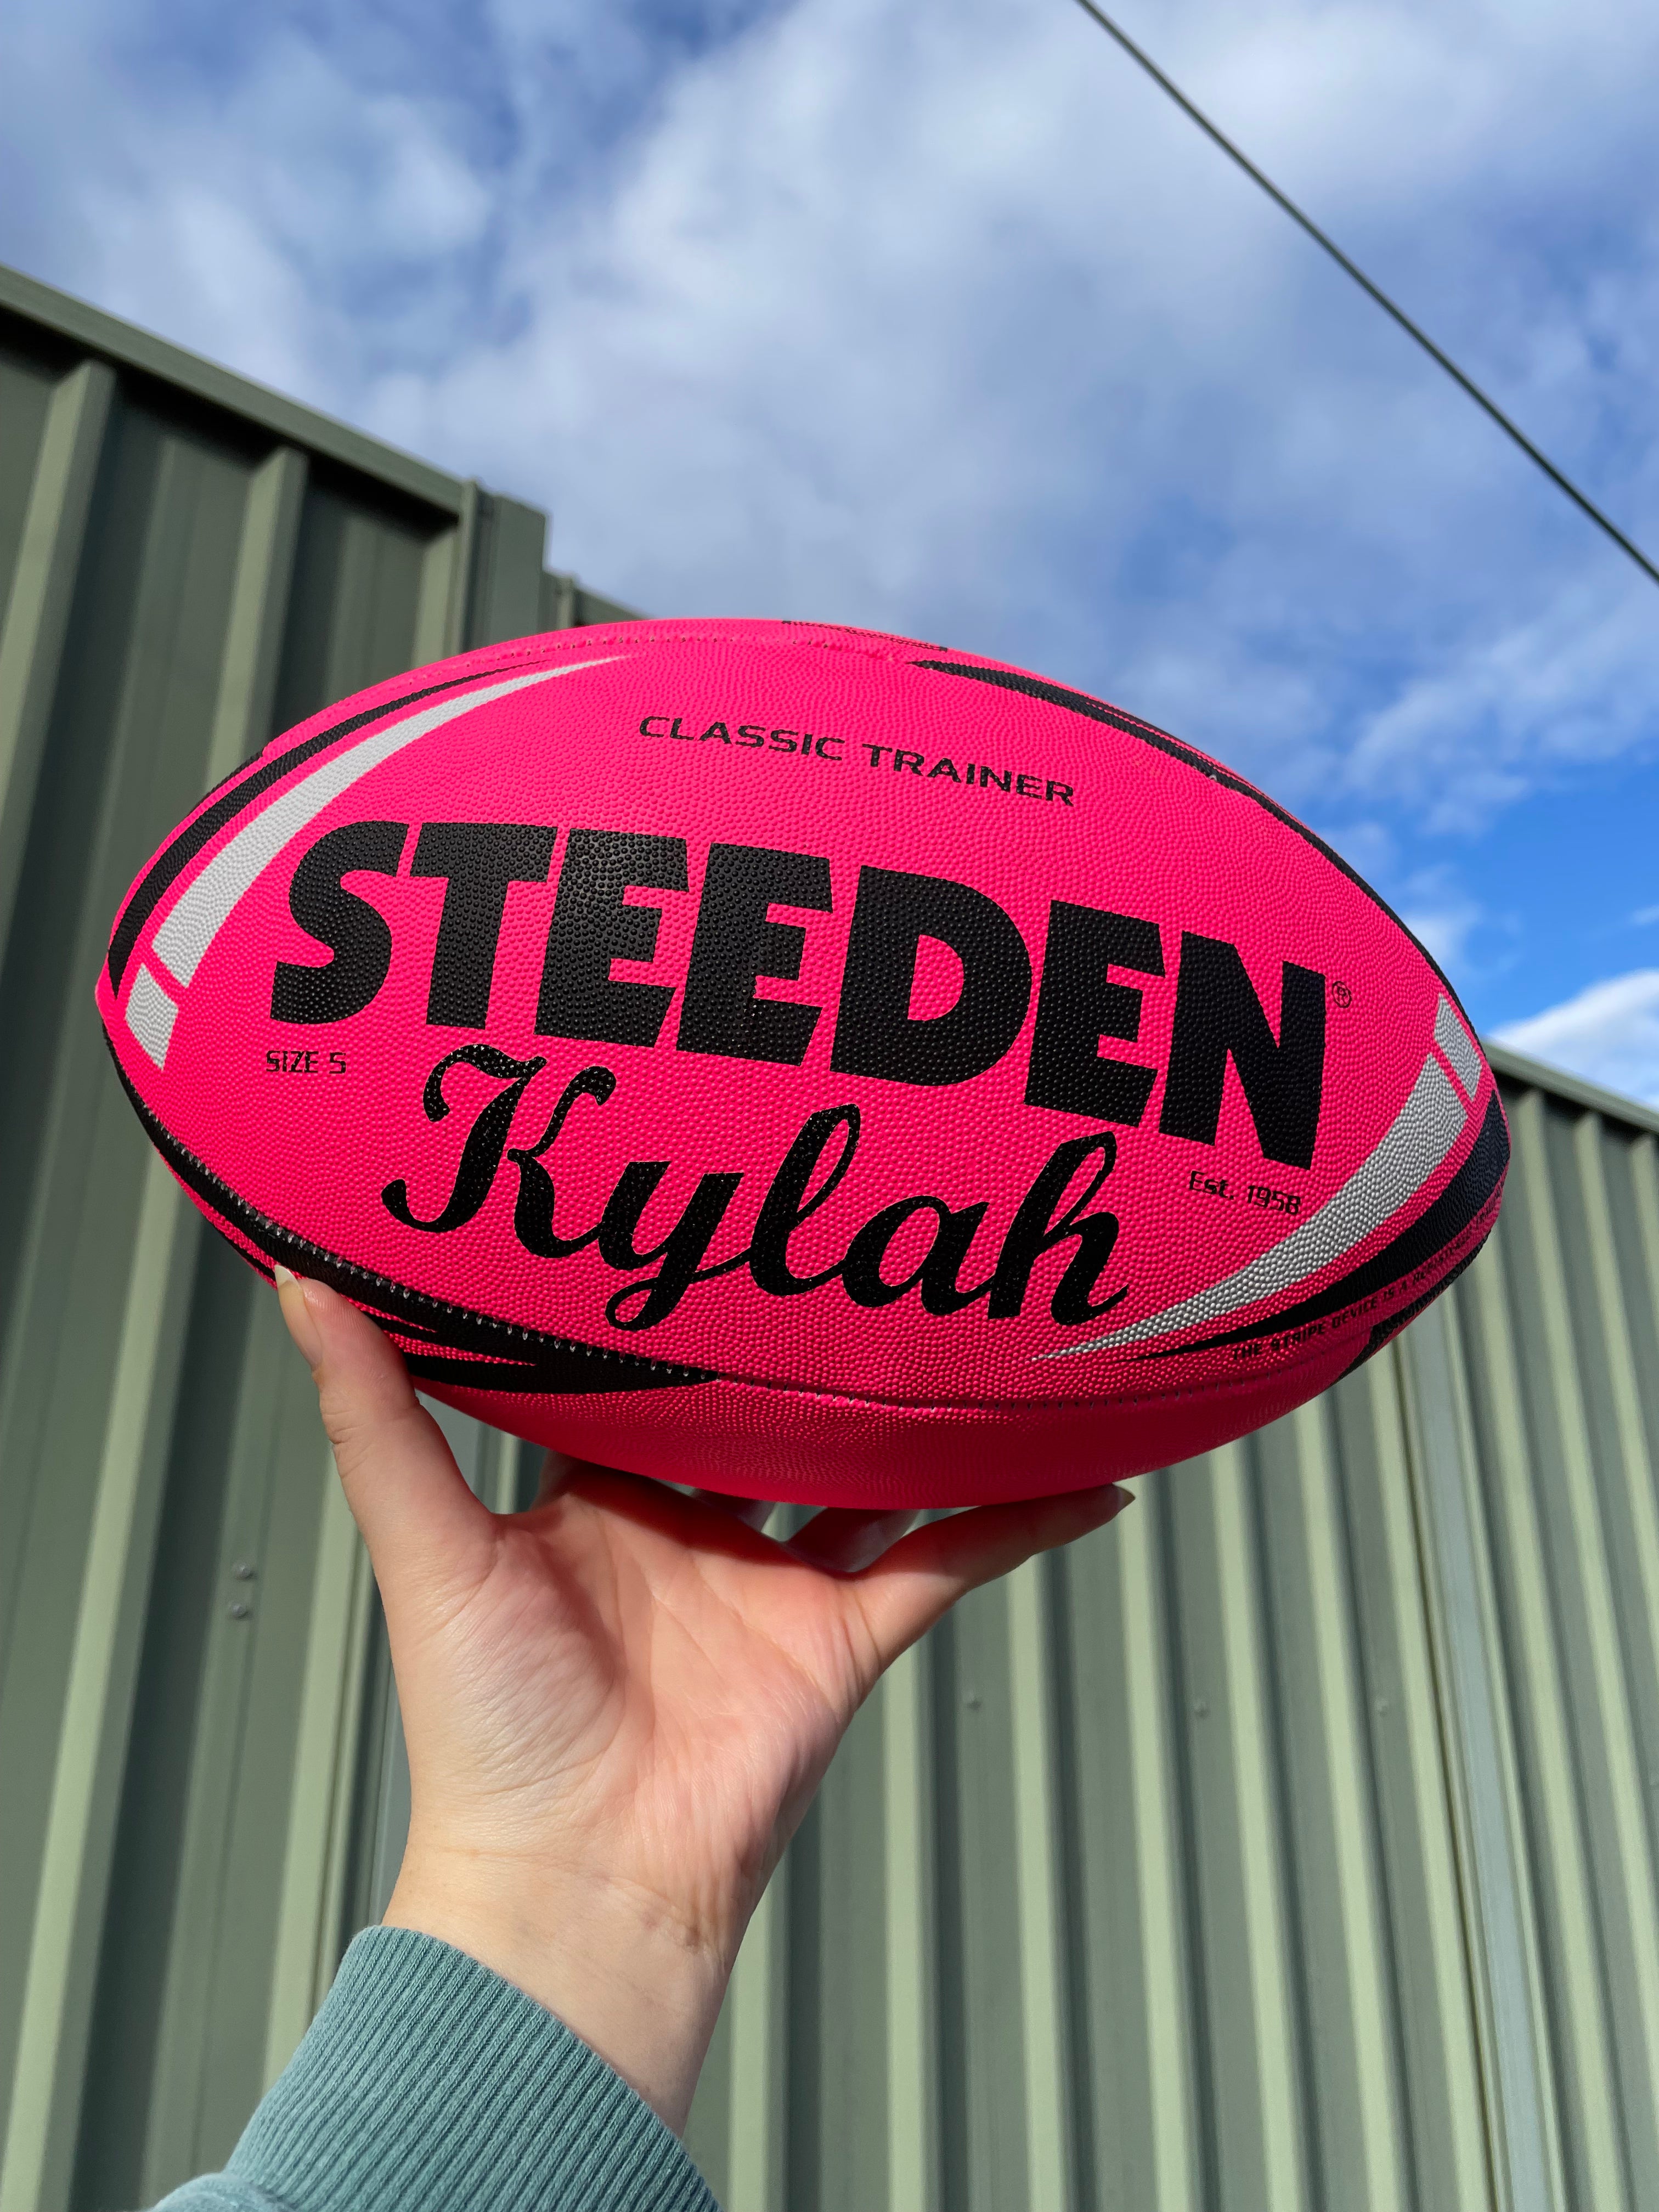 Personalised Pink Steeden Rugby League Balls (Size 5)